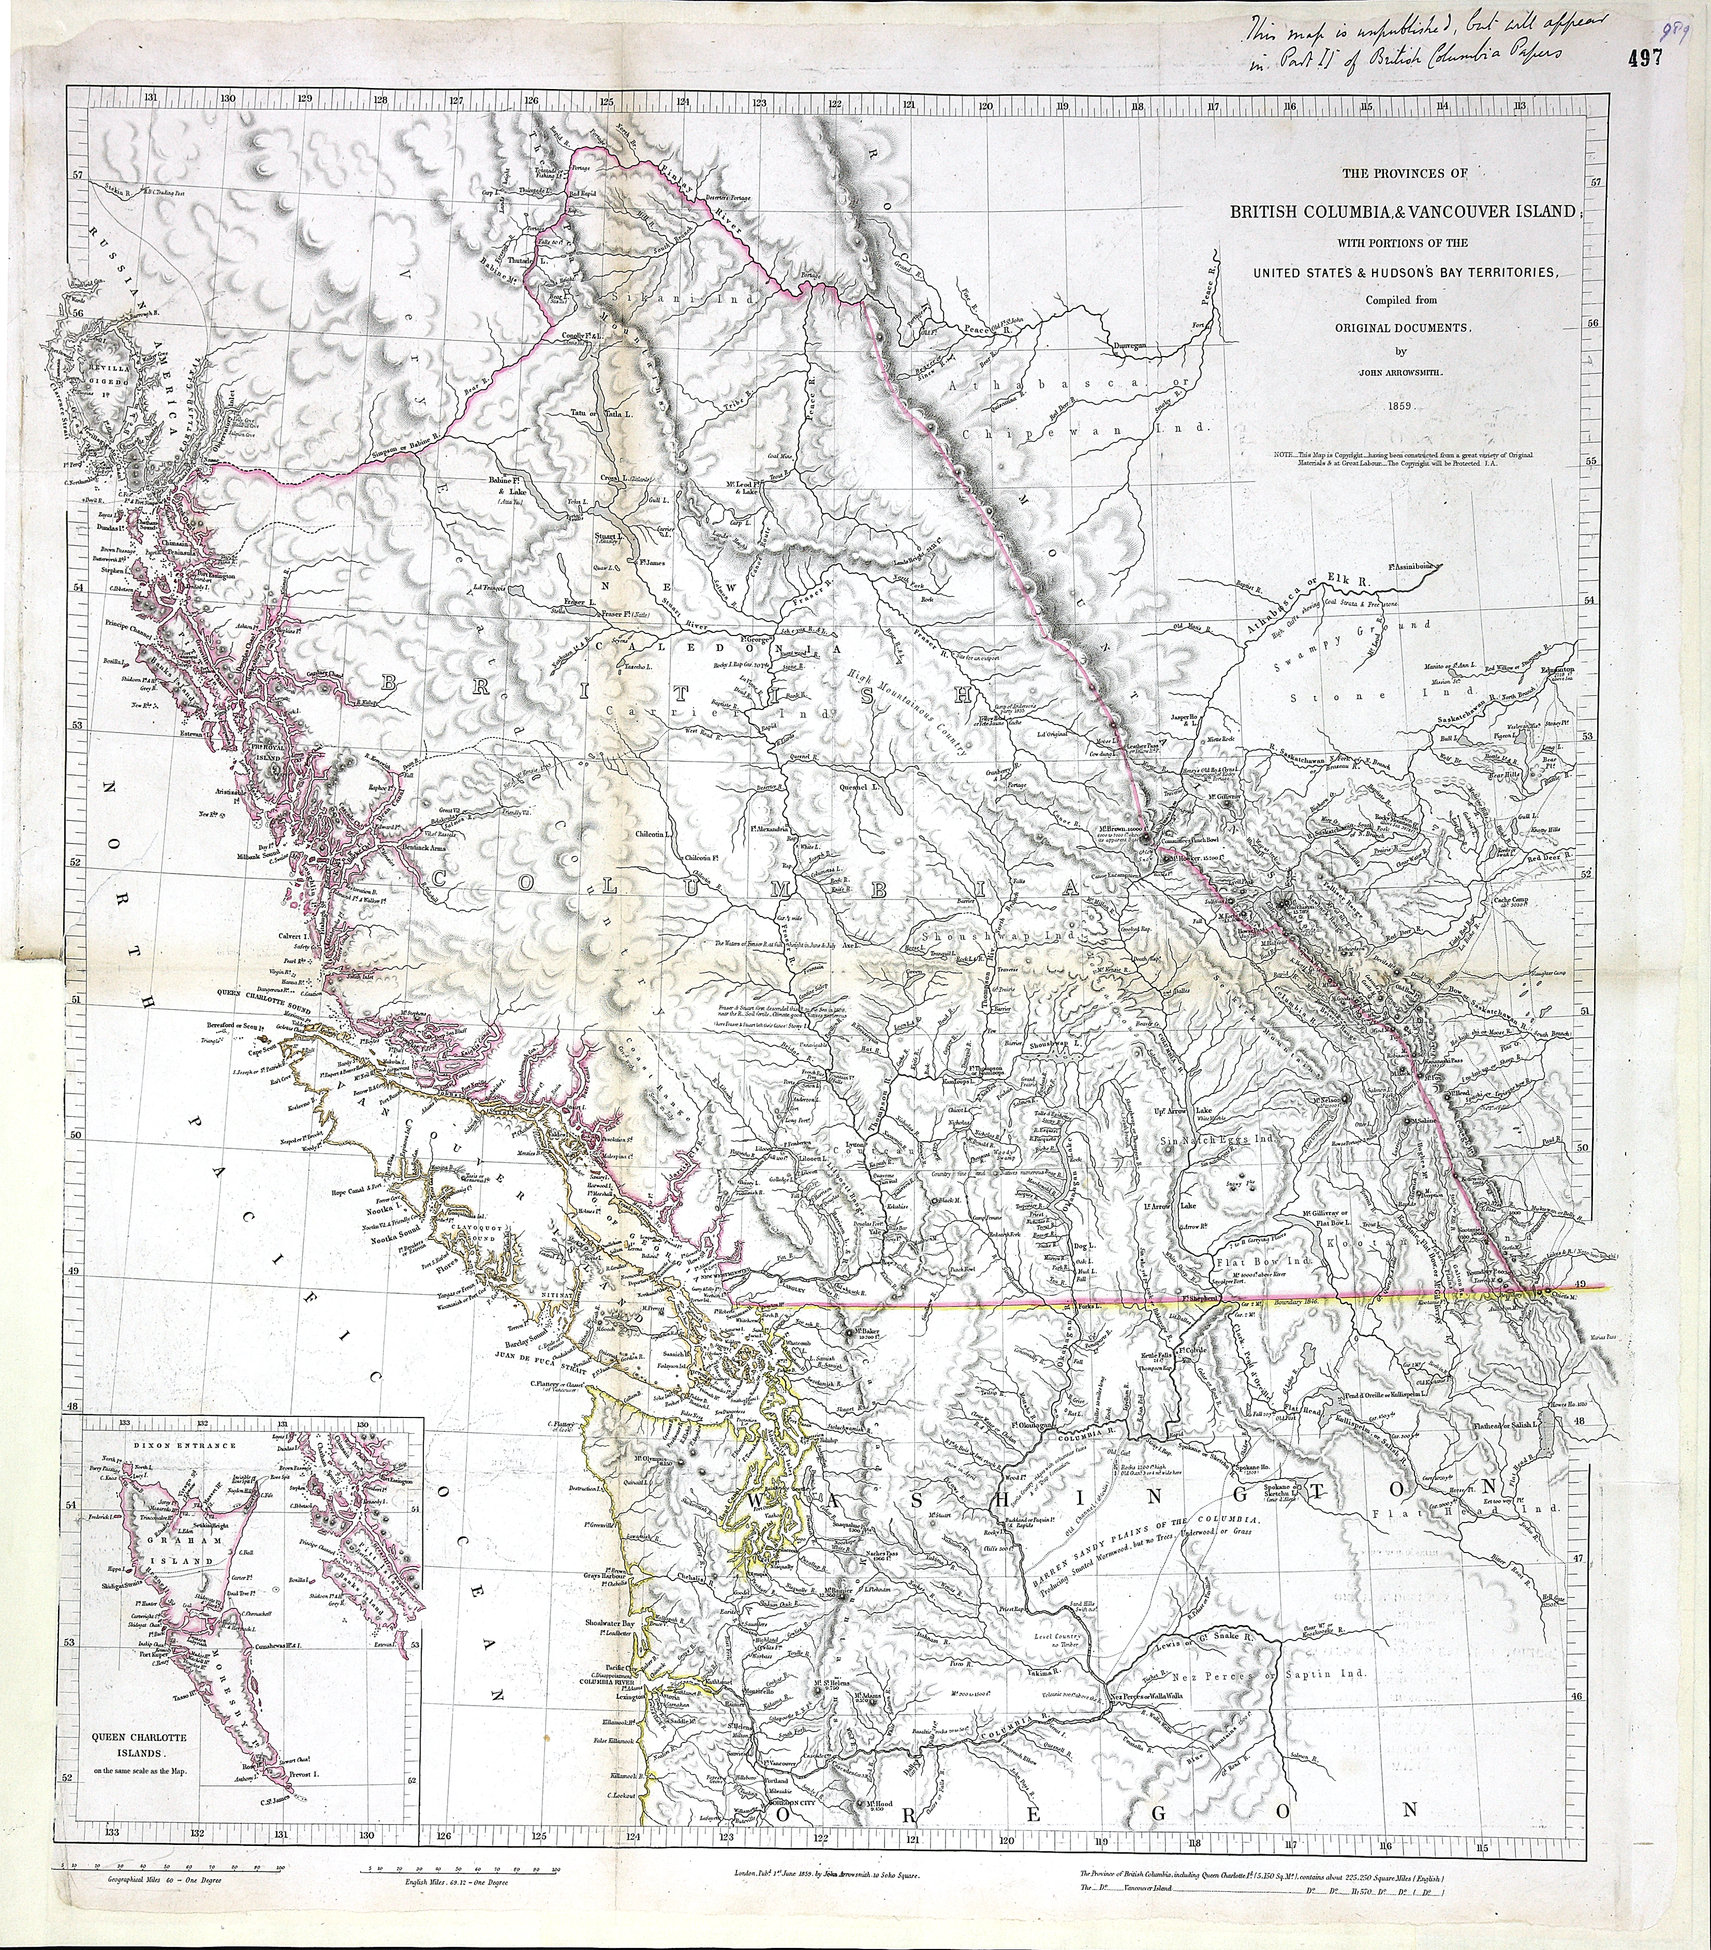 Provinces of British Columbia and Vancouver Island; with portions of the United States and Hudson's Bay Territories. John Arrowsmith, 1859